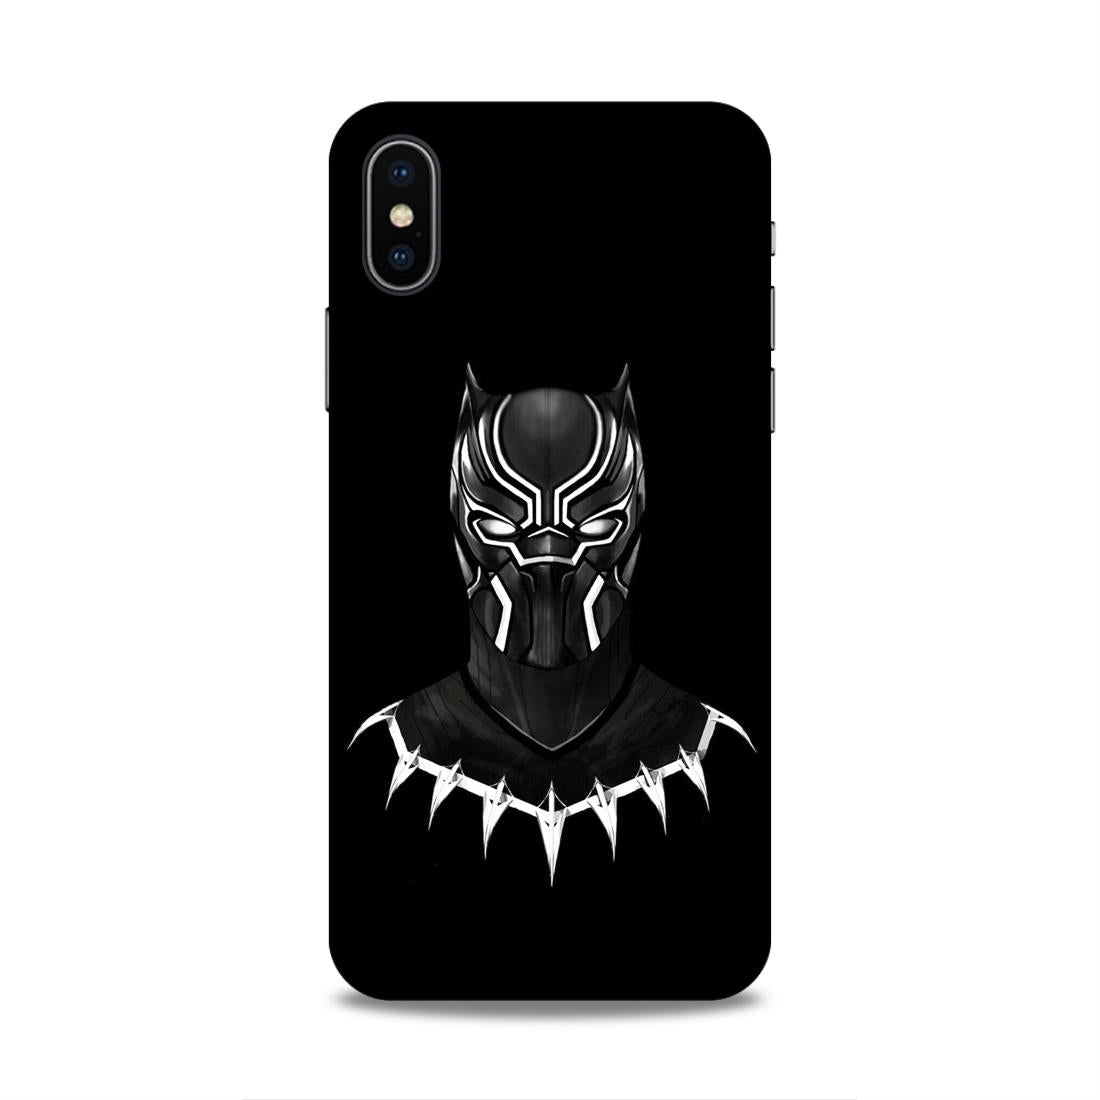 Black Panther Hard Back Case For Apple iPhone X/XS